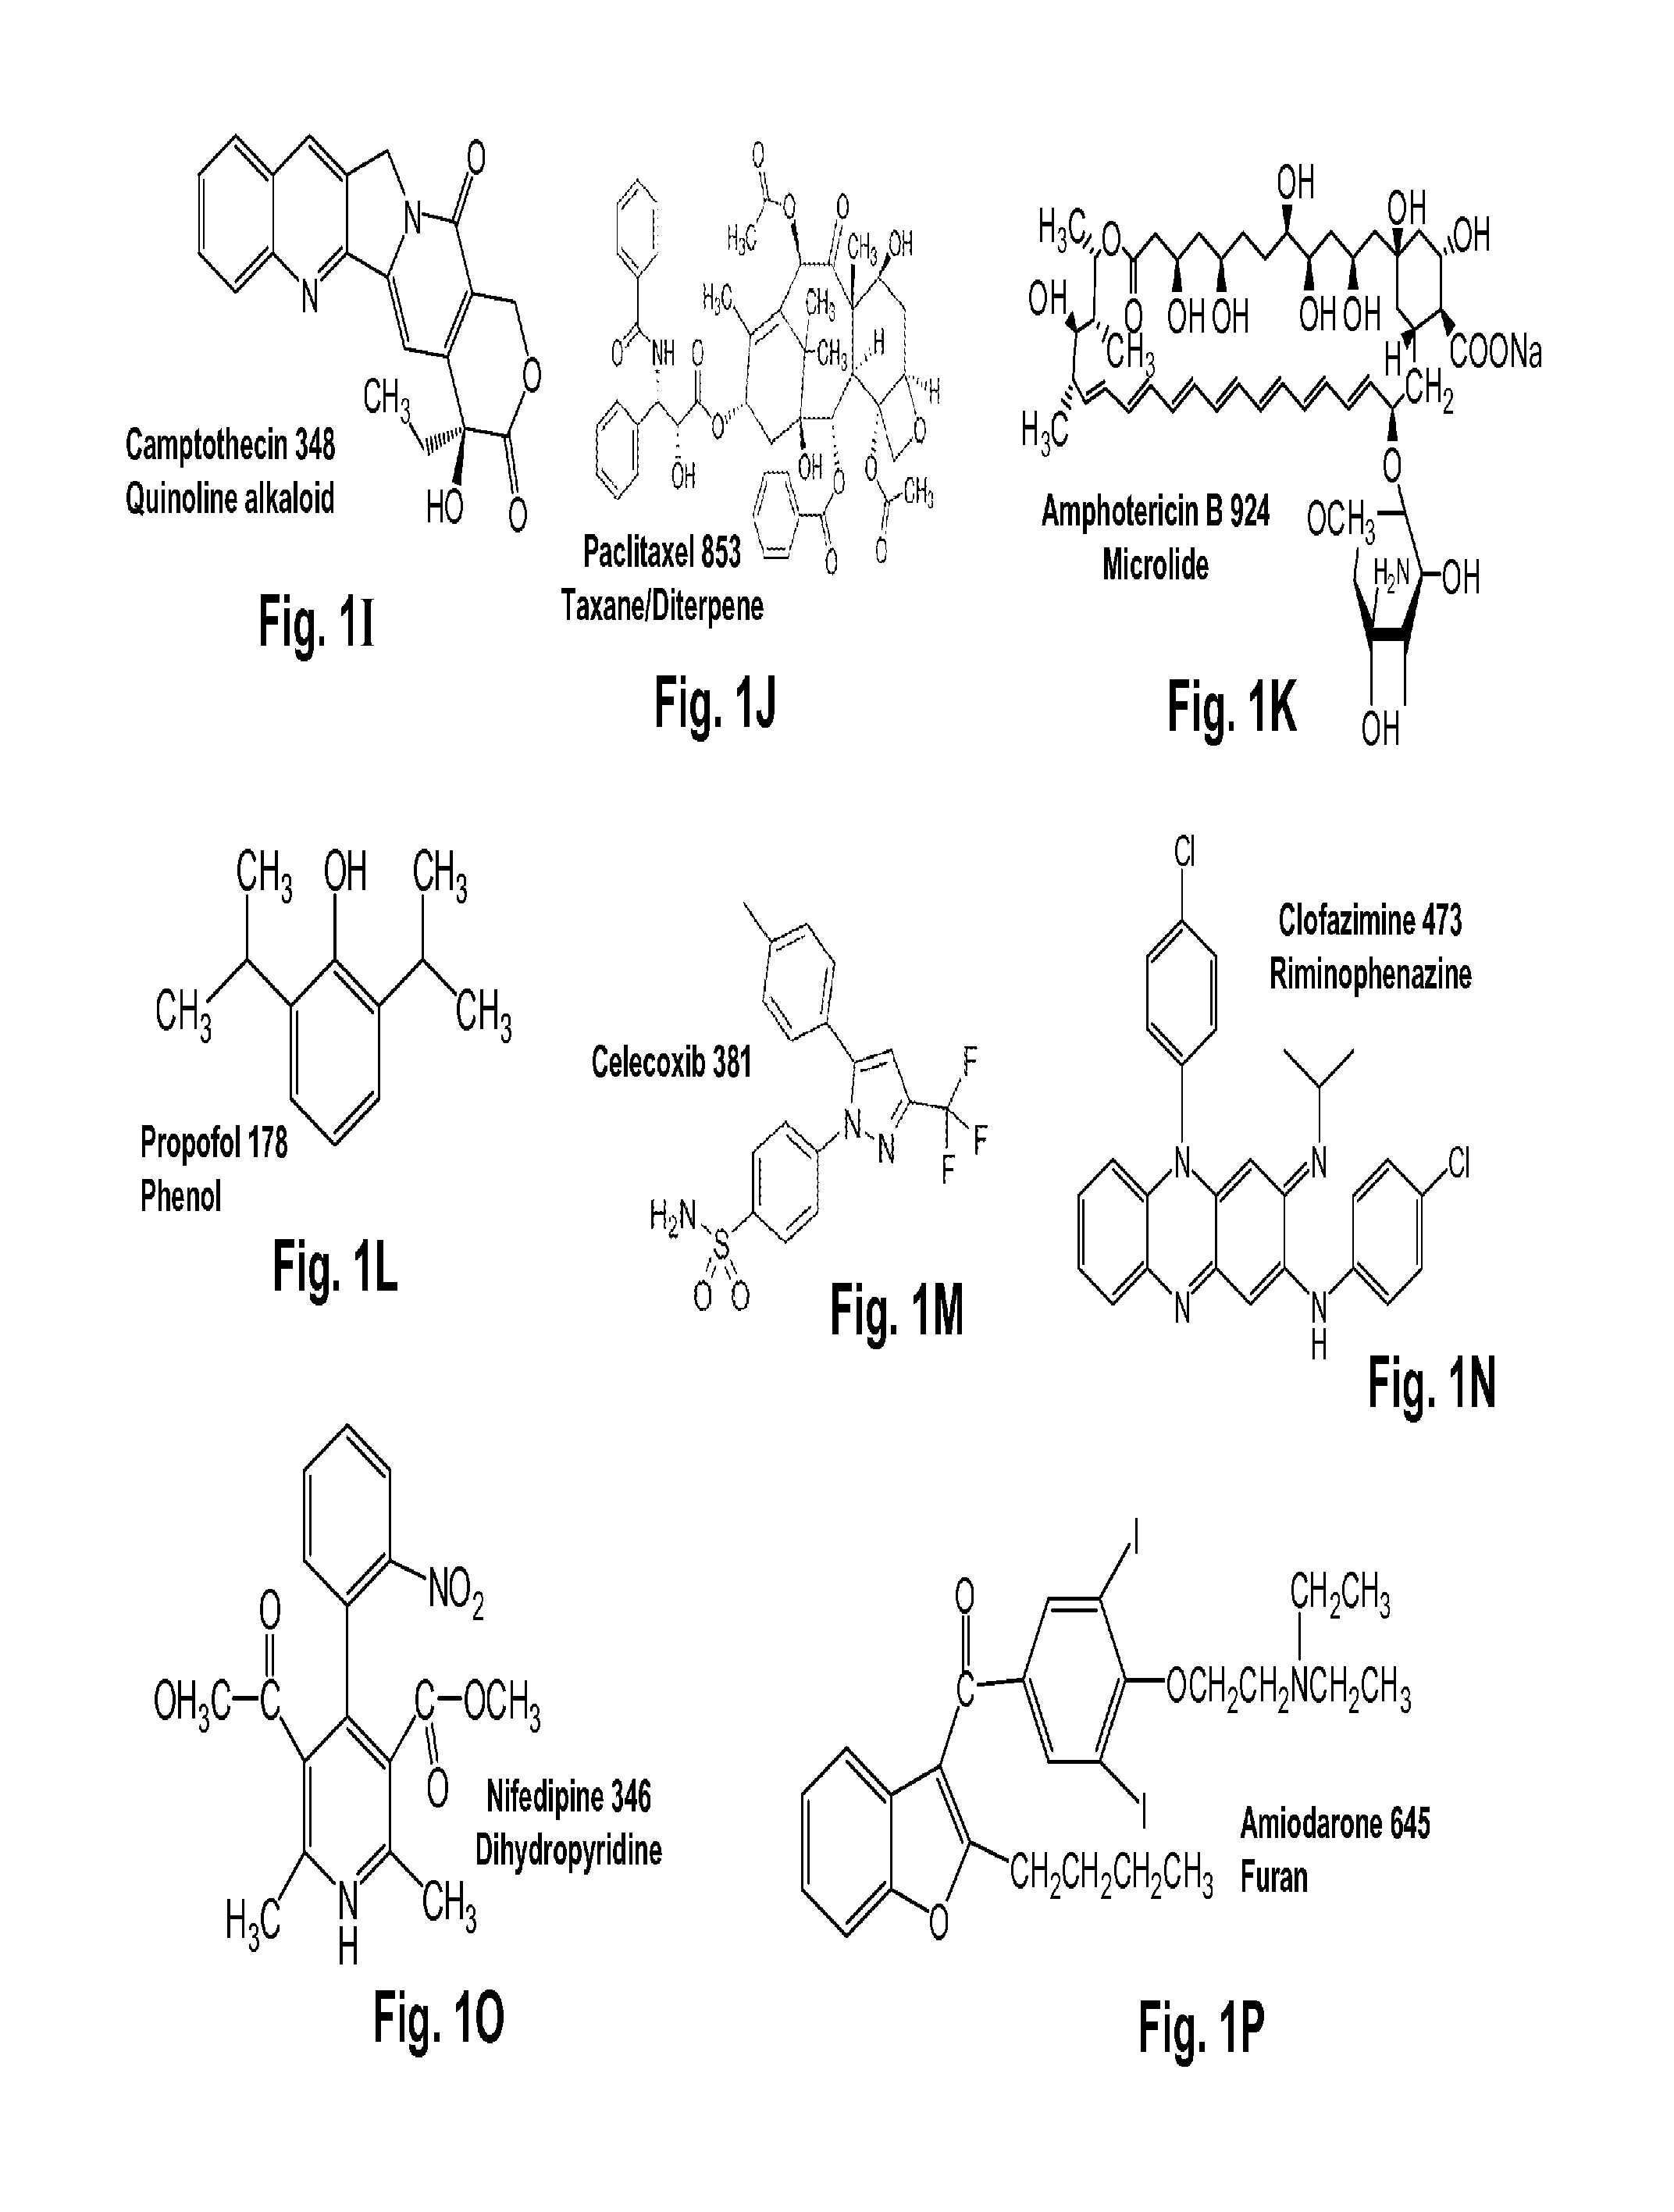 Terpene Glycosides and Their Combinations as Solubilizing Agents